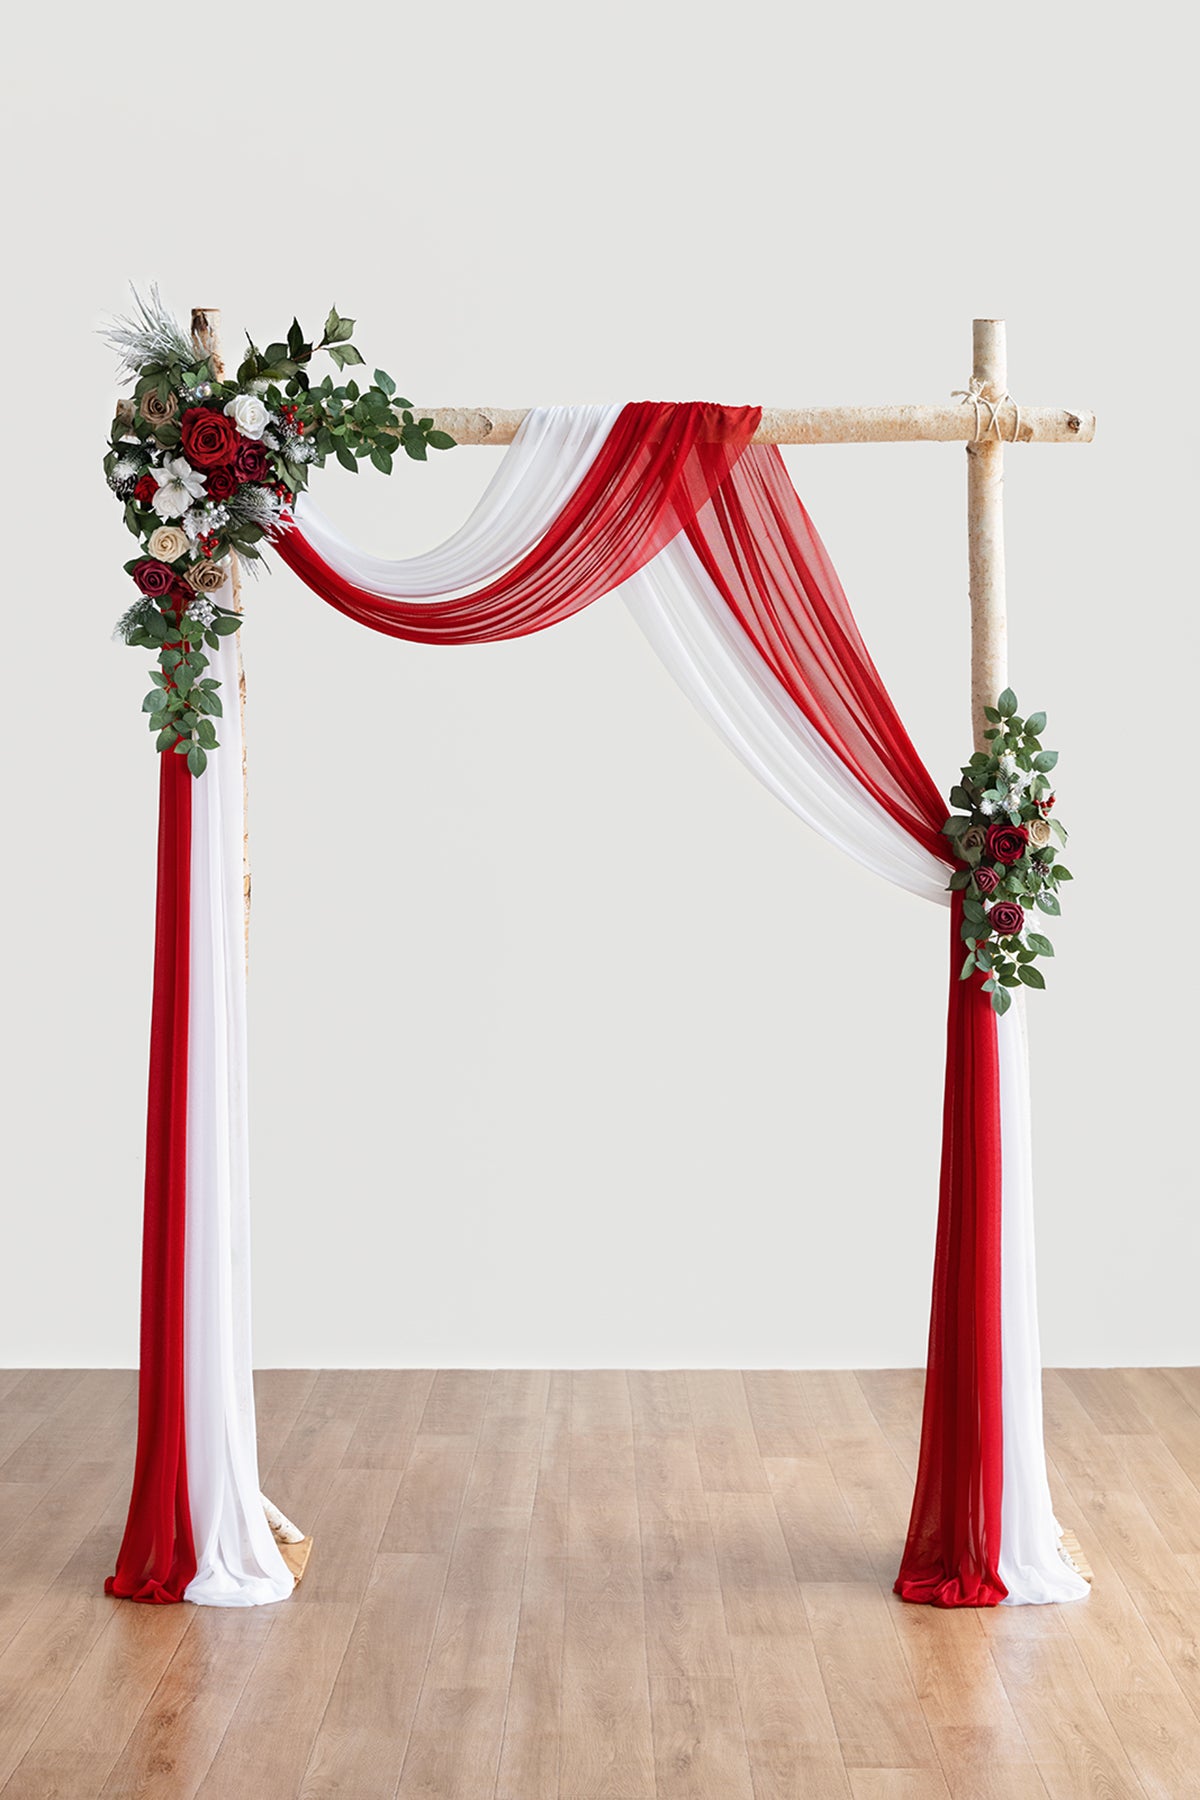 Flower Arch Decor with Drapes in Christmas Red Sparkle| Clearance